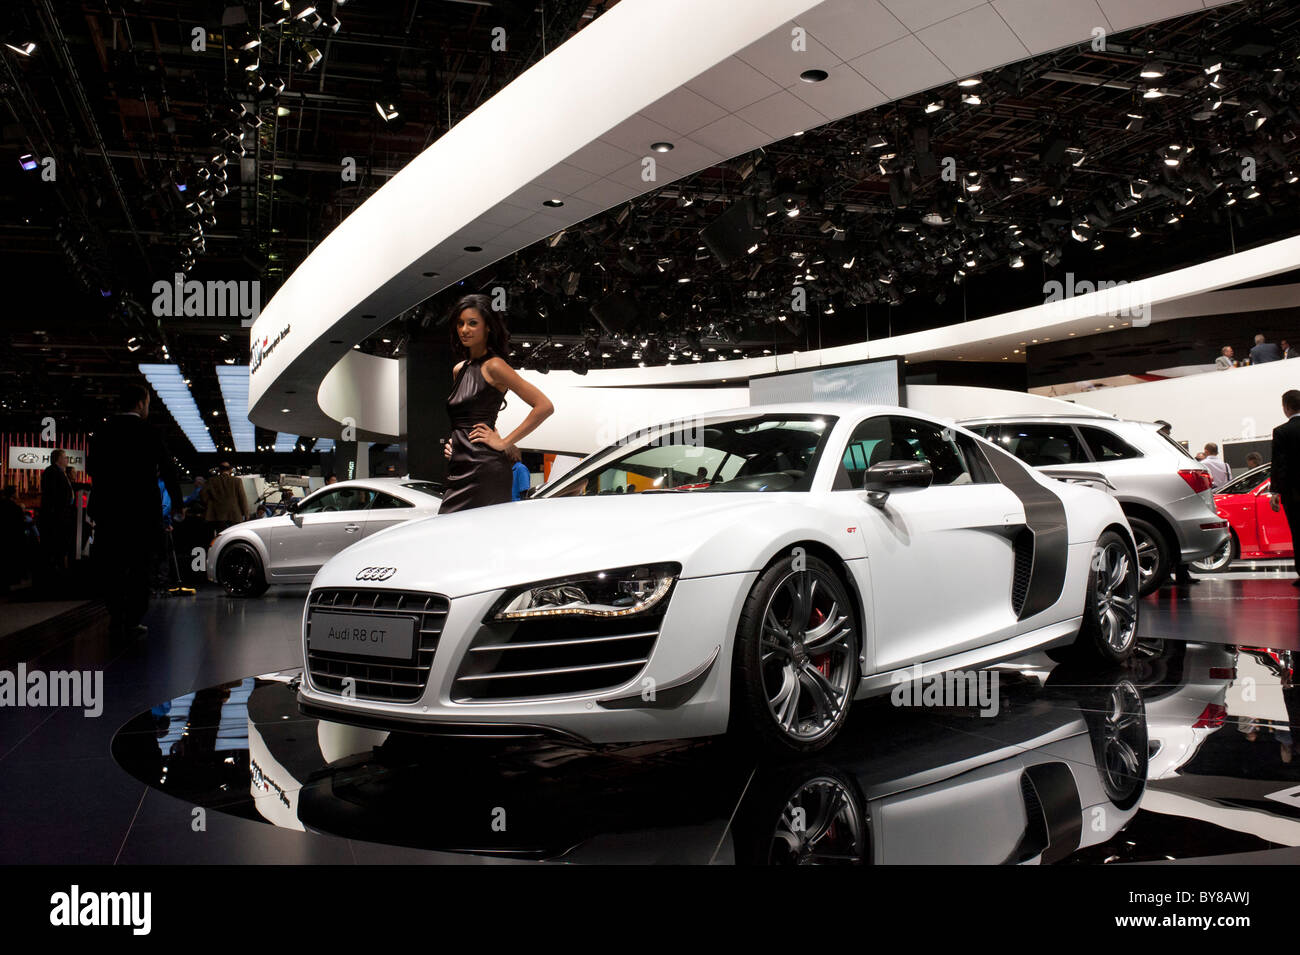 Audi R8 GT at the 2011 North American International Auto Show in Detroit Stock Photo